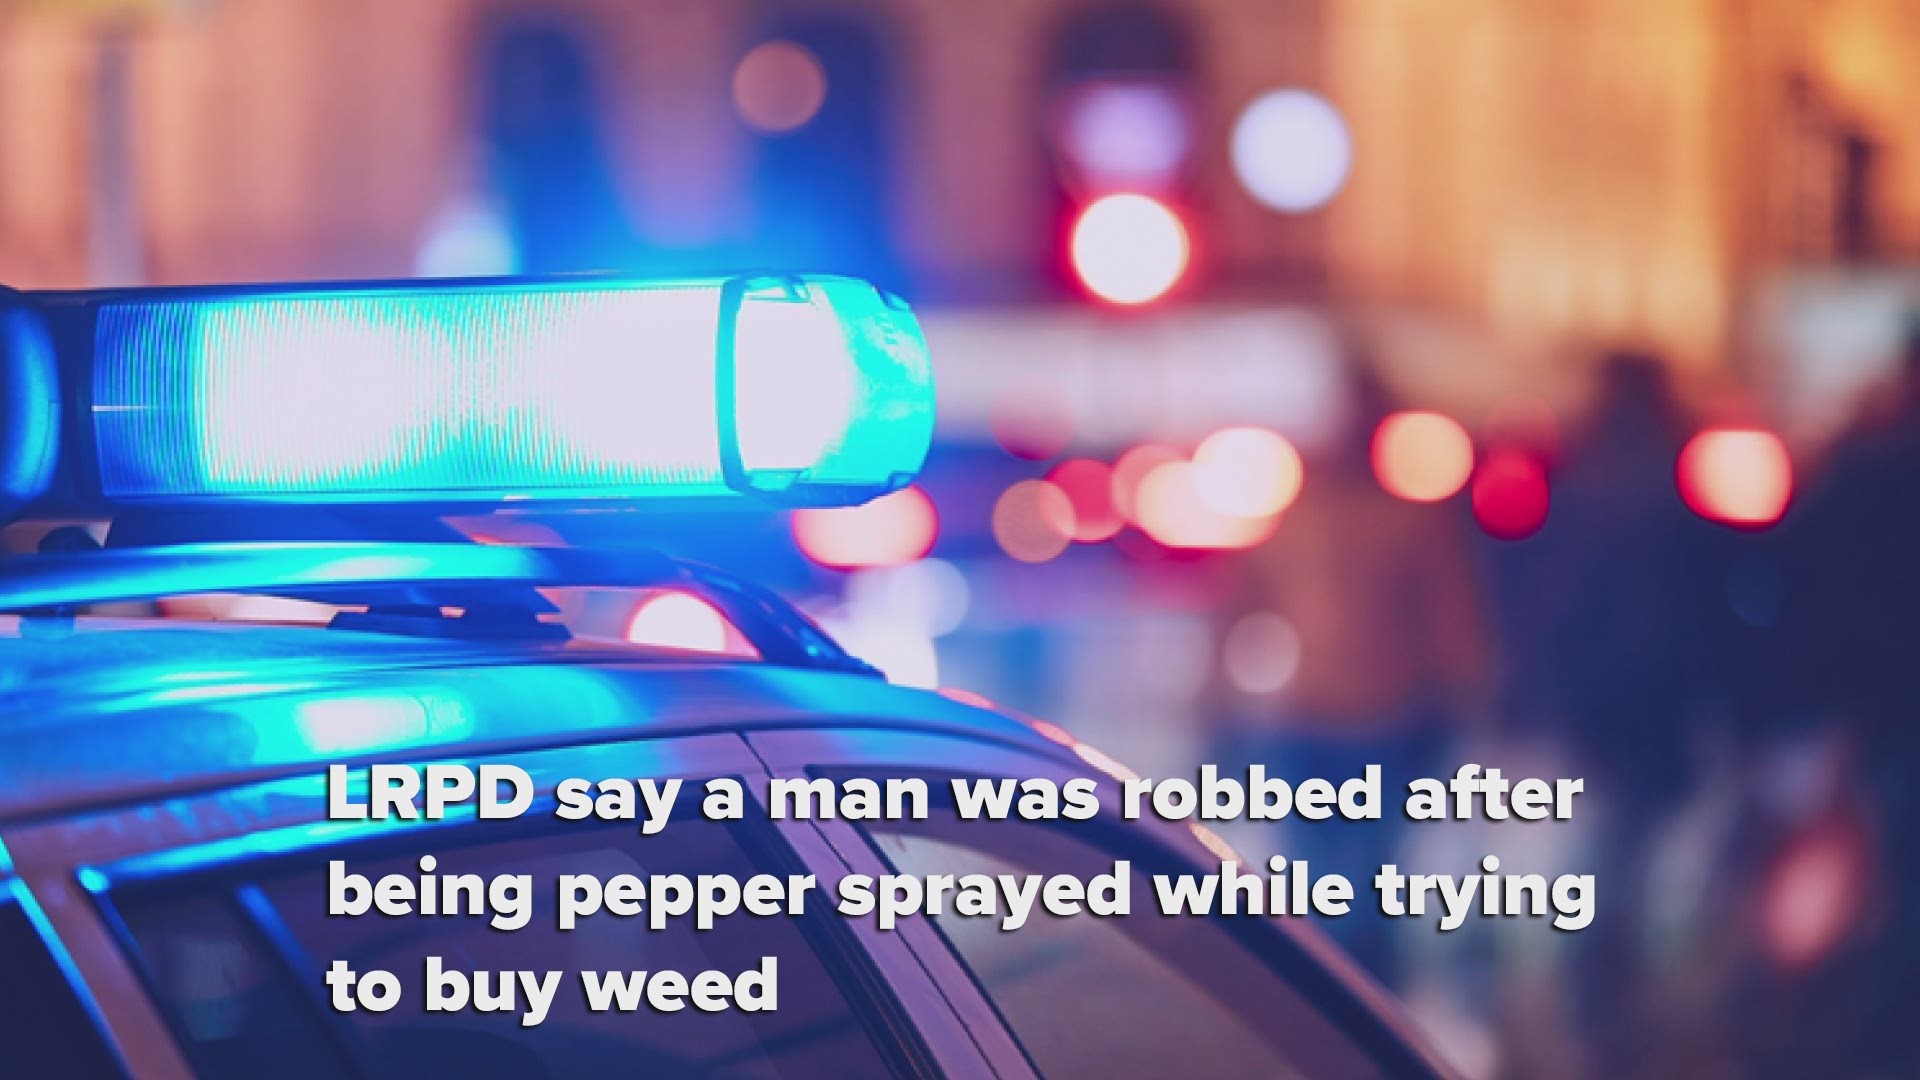 Police say the man was trying to buy weed when he was allegedly pepper sprayed by a suspect.